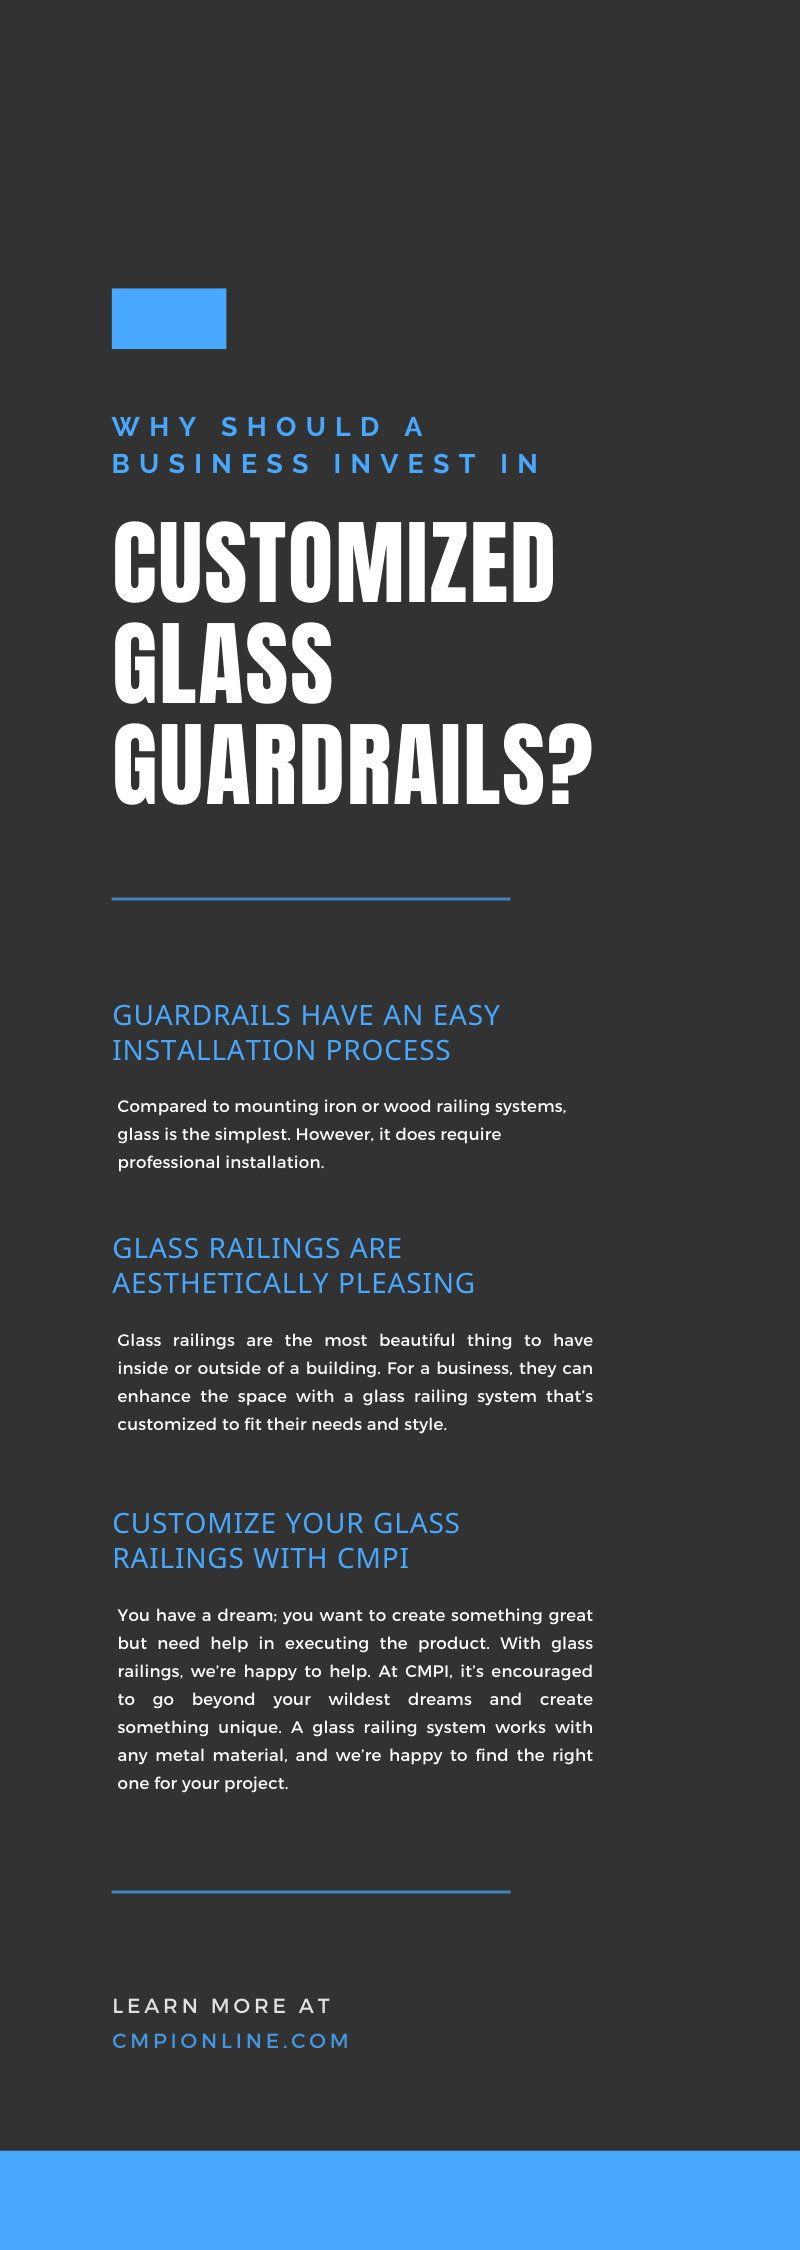 Why Should a Business Invest in Customized Glass Guardrails?